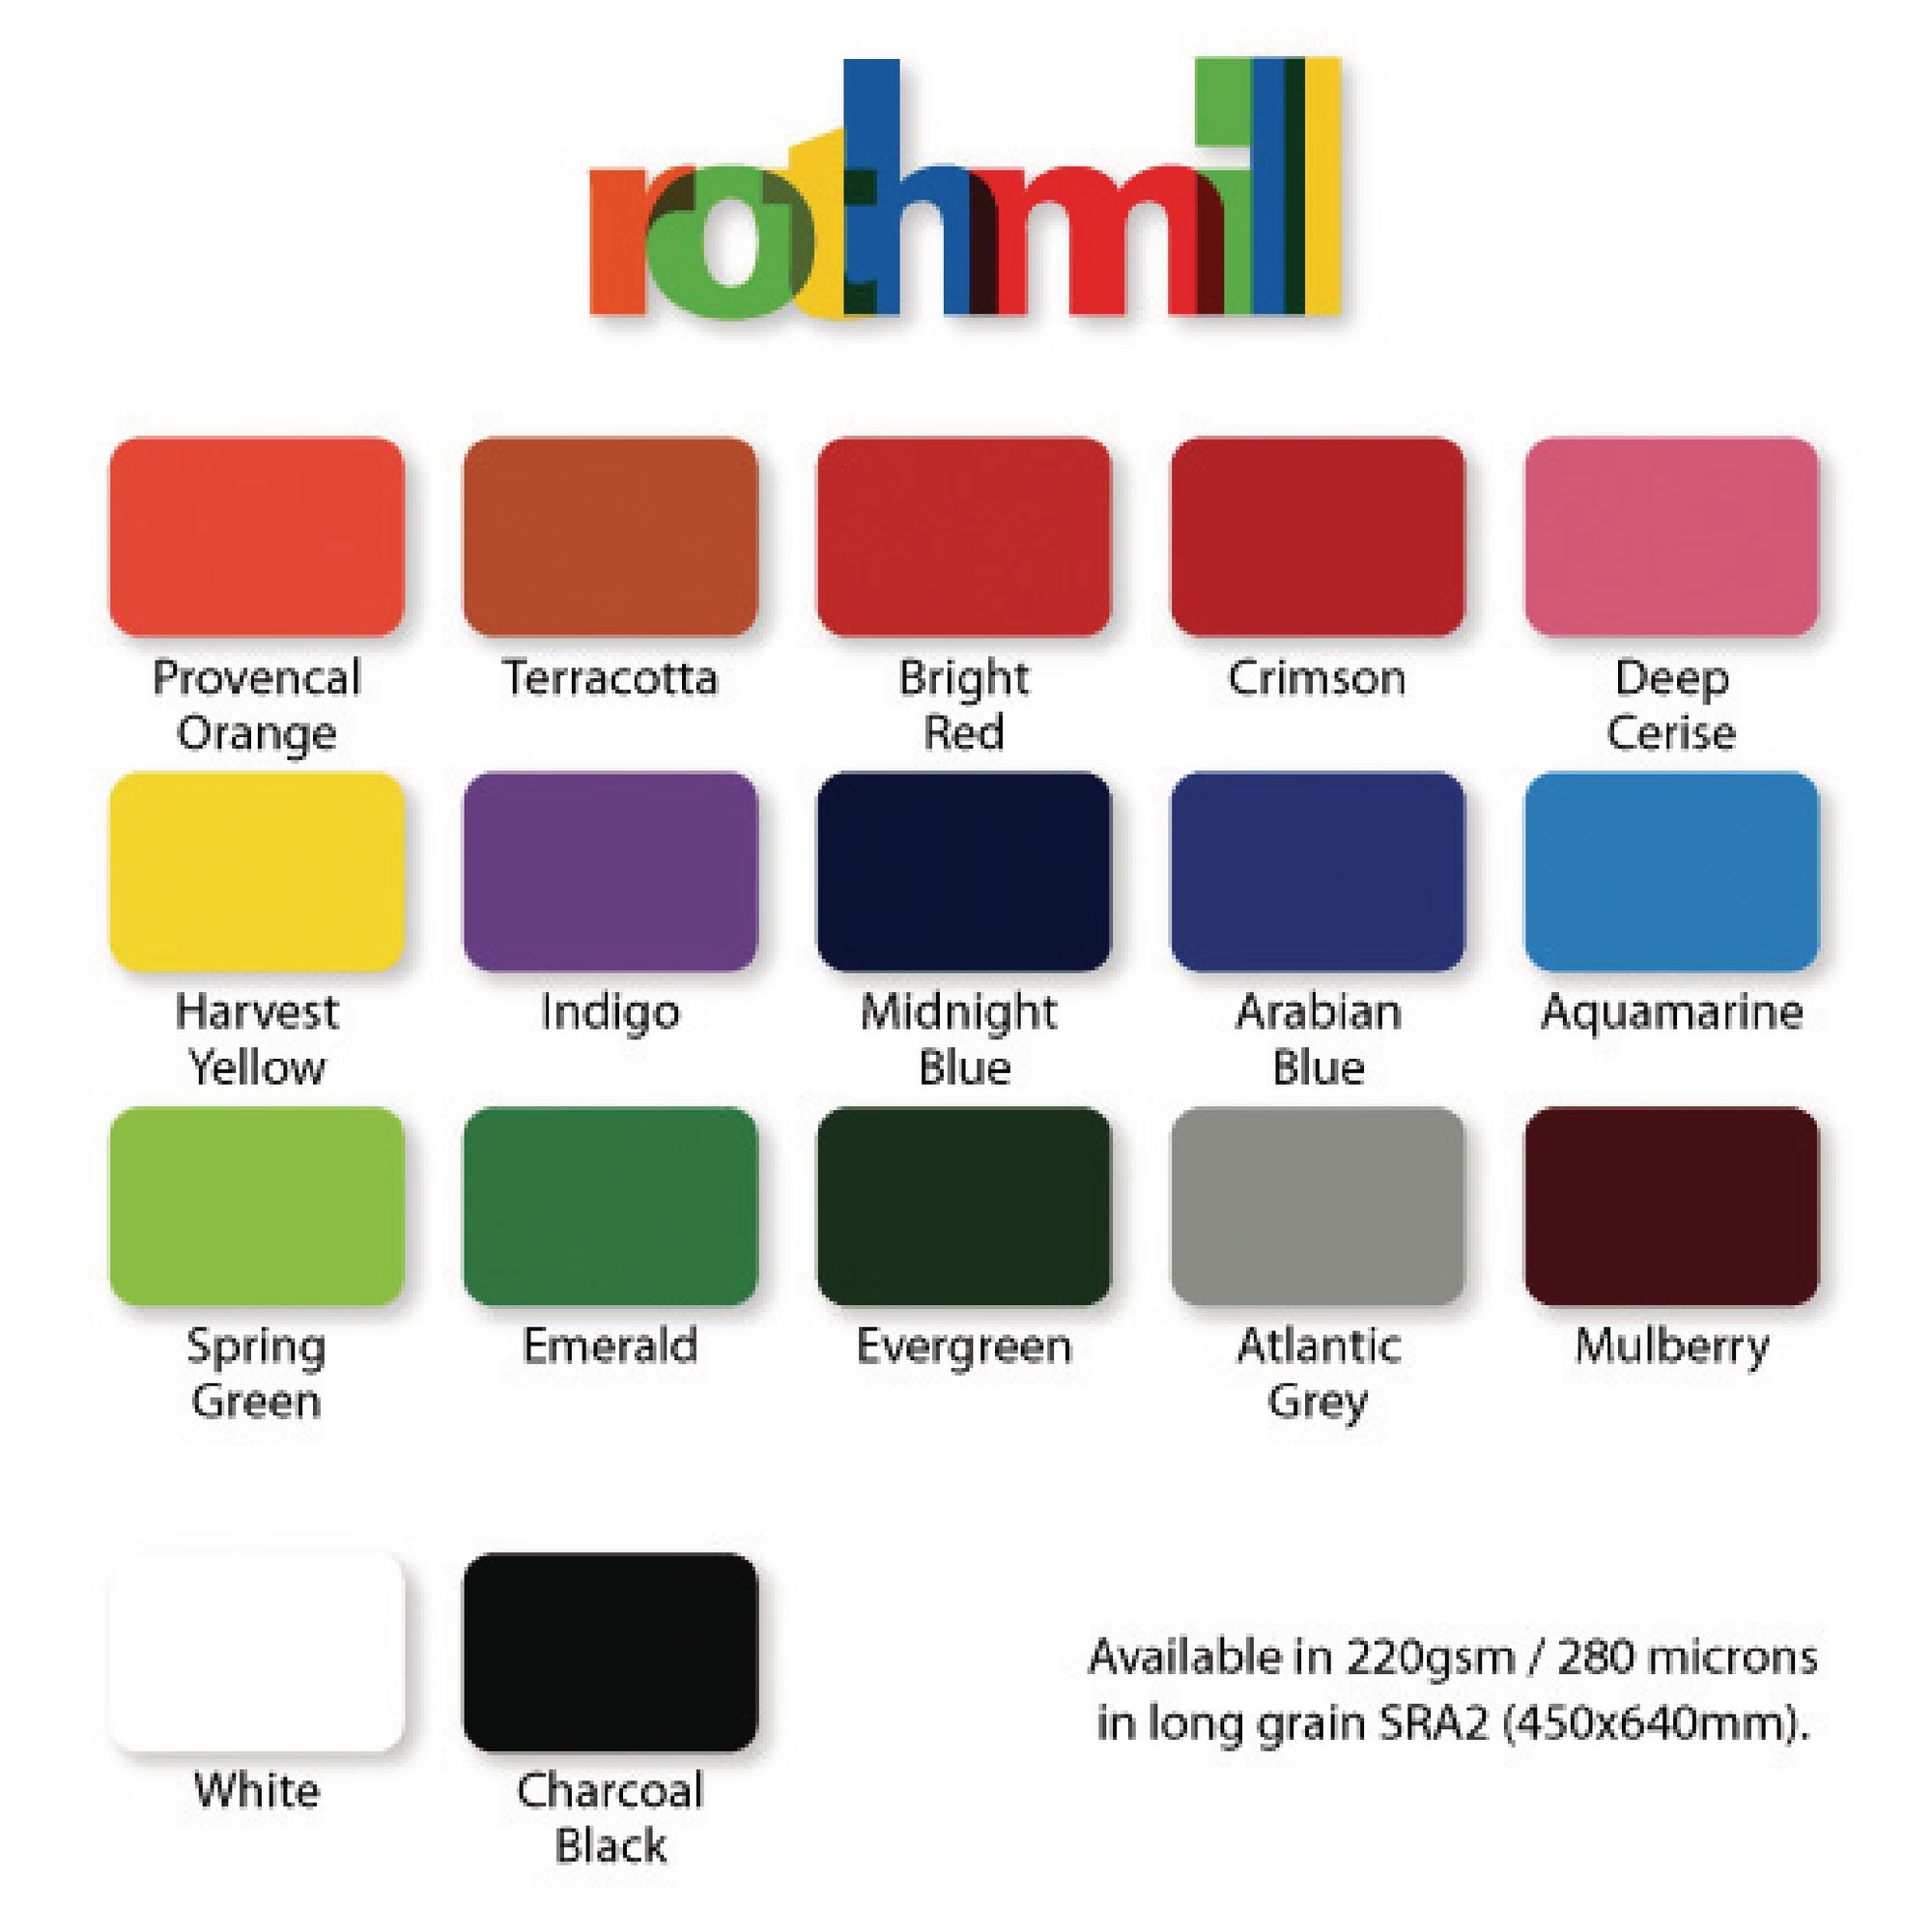 Rothmill SRA2 Brilliant Colour Card - Harvest yellow